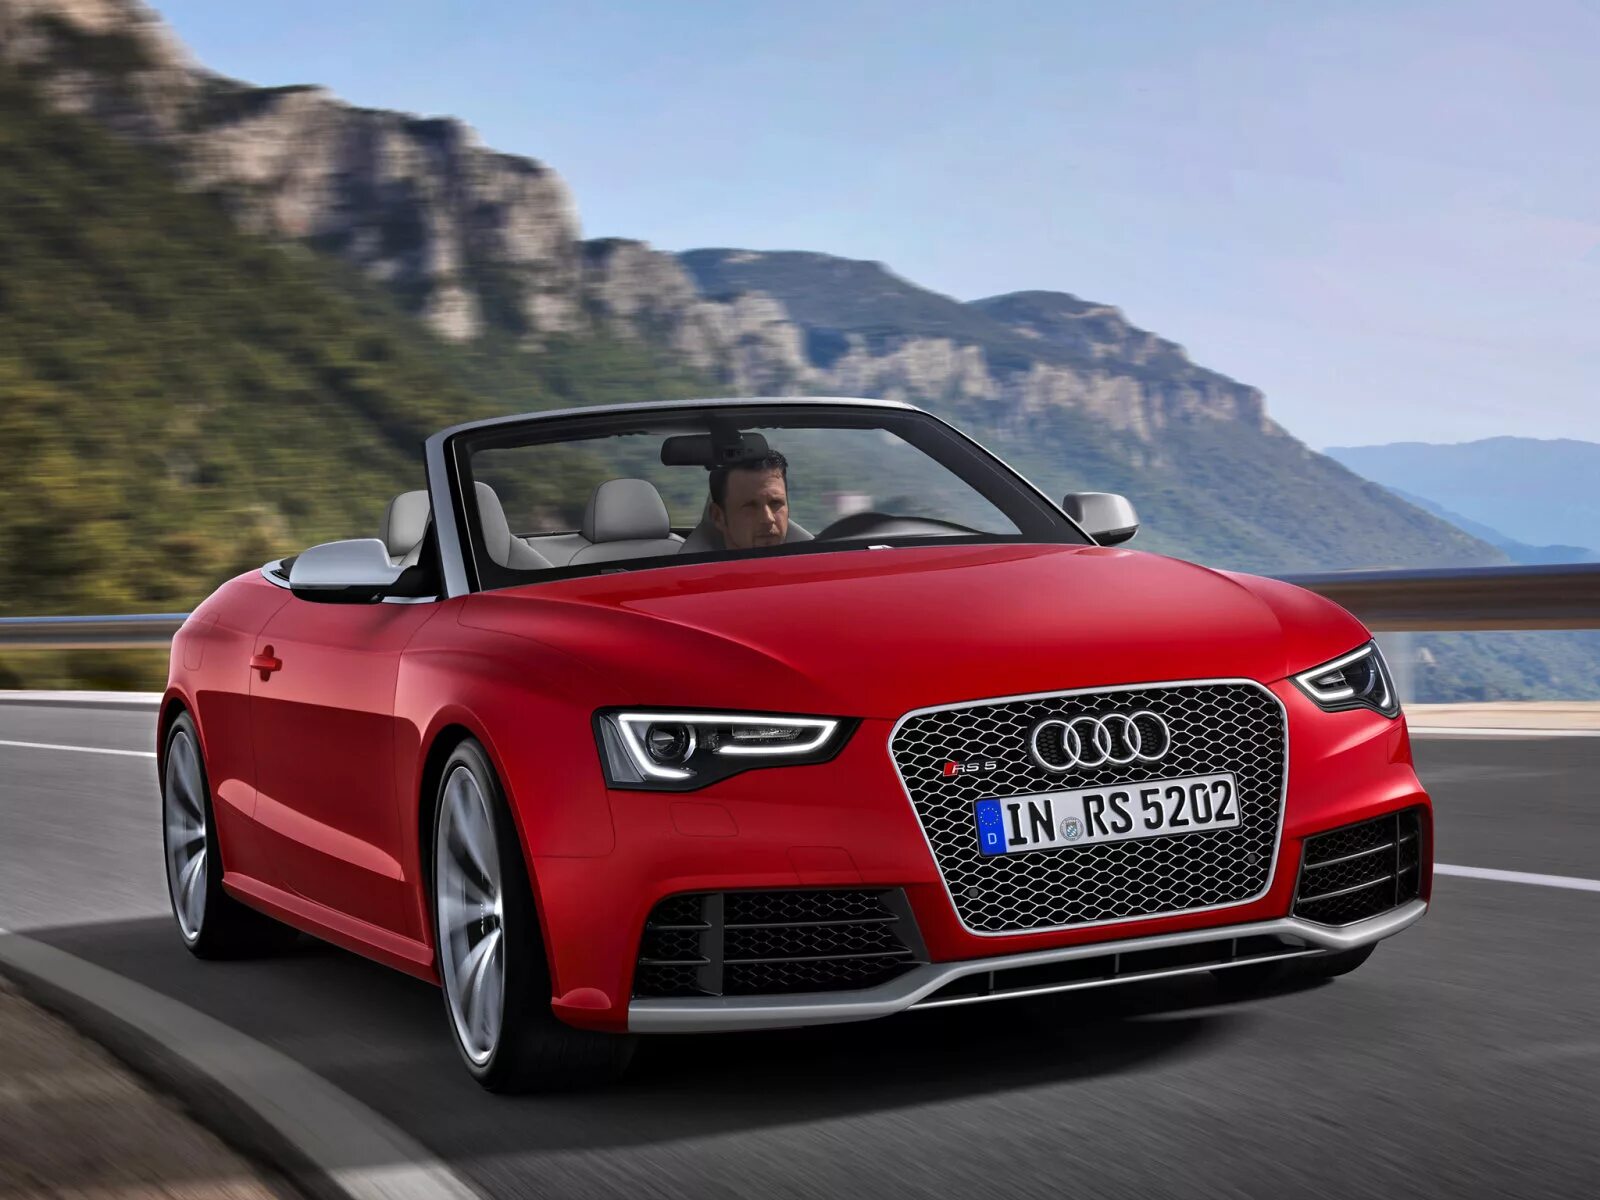 Audi rs5 Cabriolet 2013. Audi rs5 Cabriolet 2020. Audi rs5 2012. Audi rs5 Cabriolet 2022.